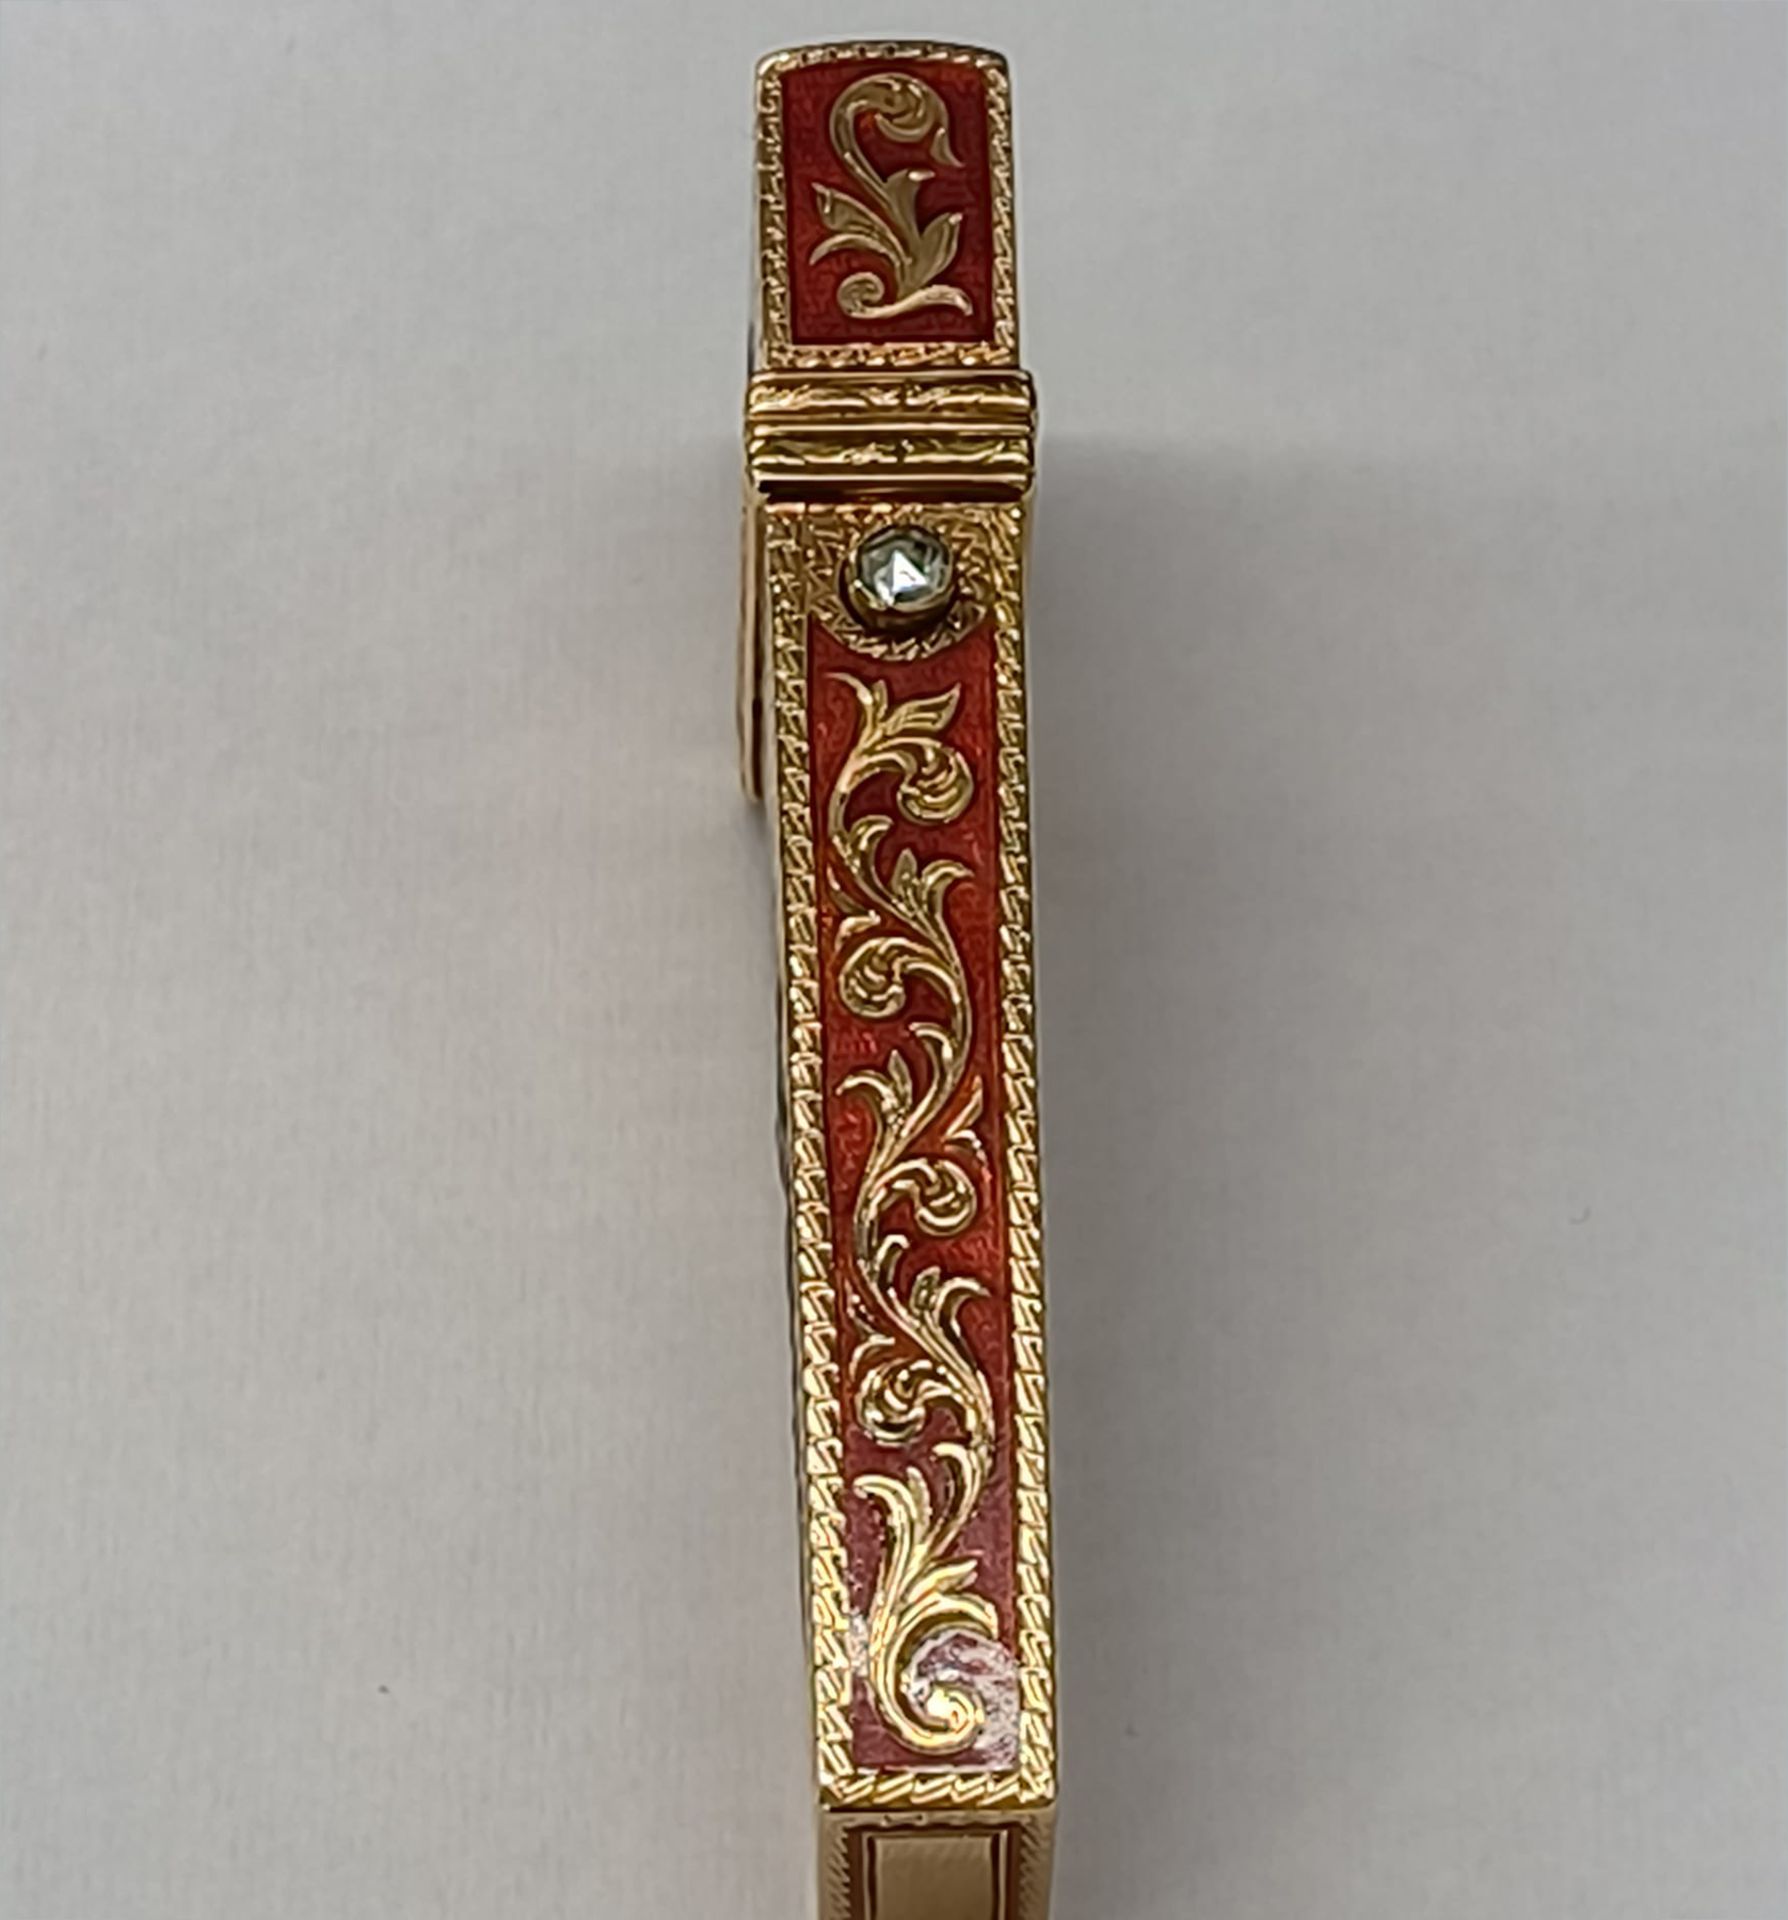 Etui in sterling gold and enamel set with rubies and old-cut diamond, Russian work from the early 20 - Image 5 of 8